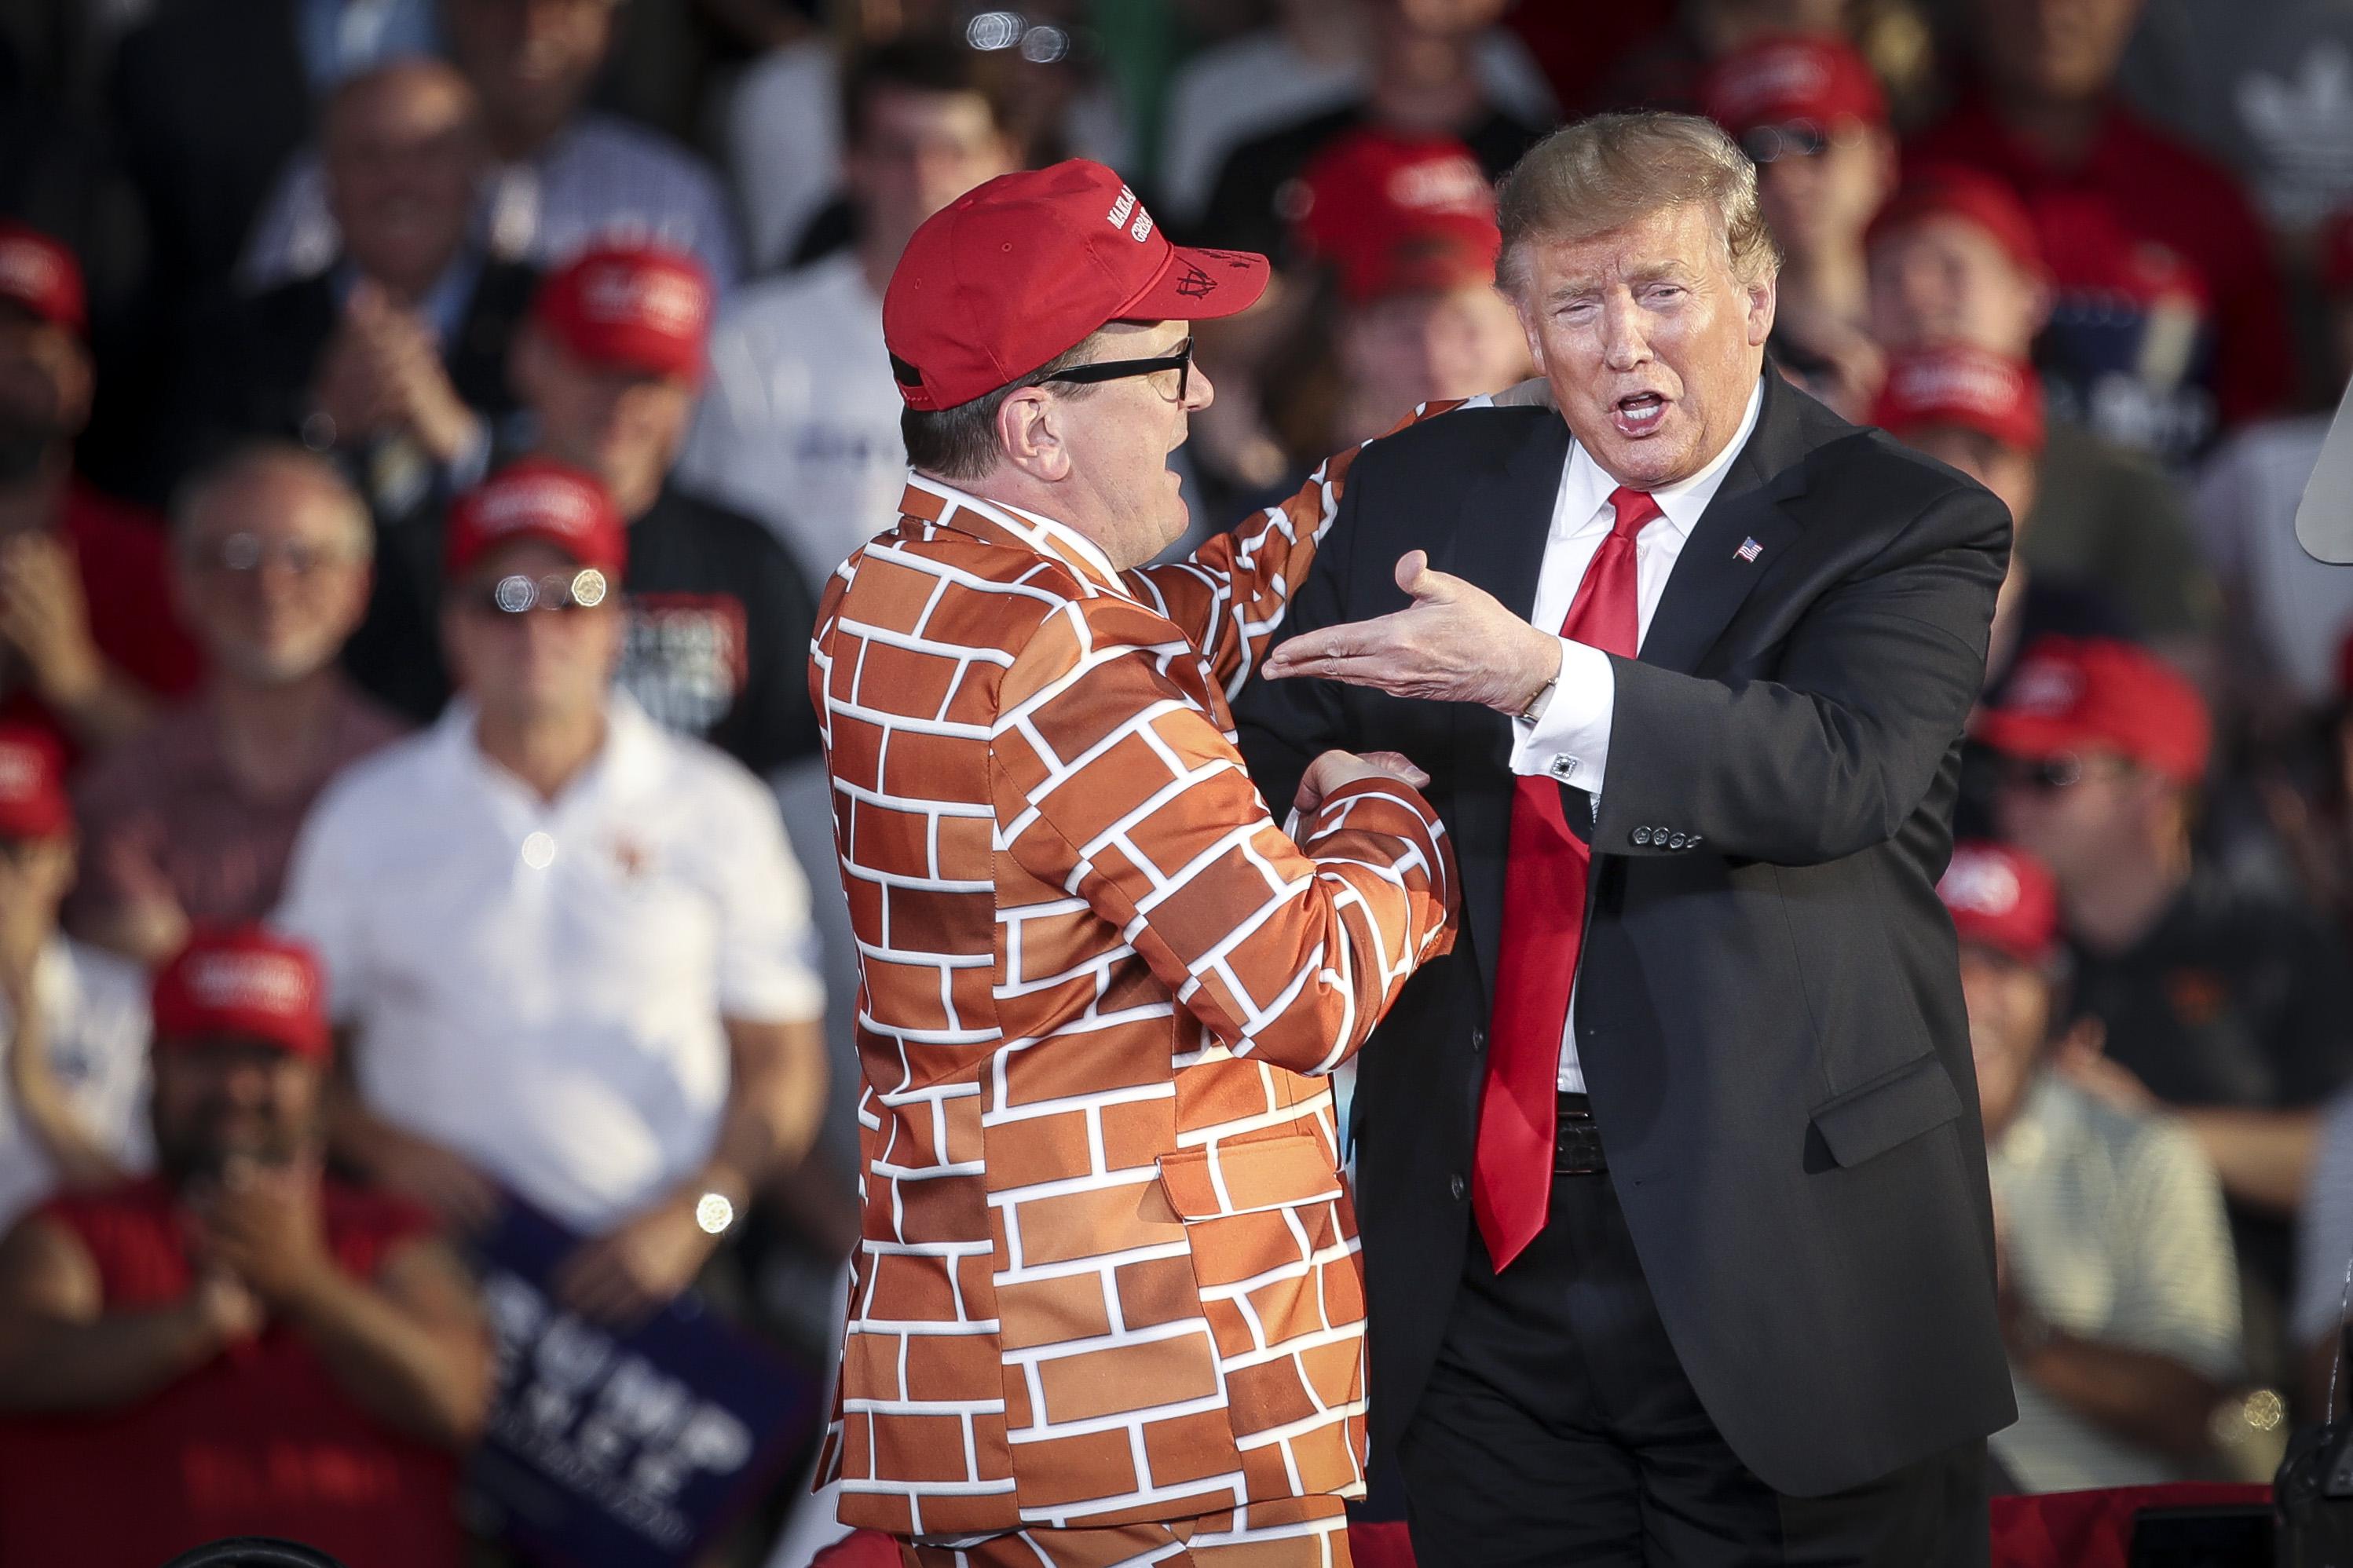 President Trump calls up a mean wearing a jacket with bricks representing a border wall to the stage during a 'Make America Great Again' campaign rally at Williamsport Regional Airport, May 20, 2019 in Montoursville, Pennsylvania.